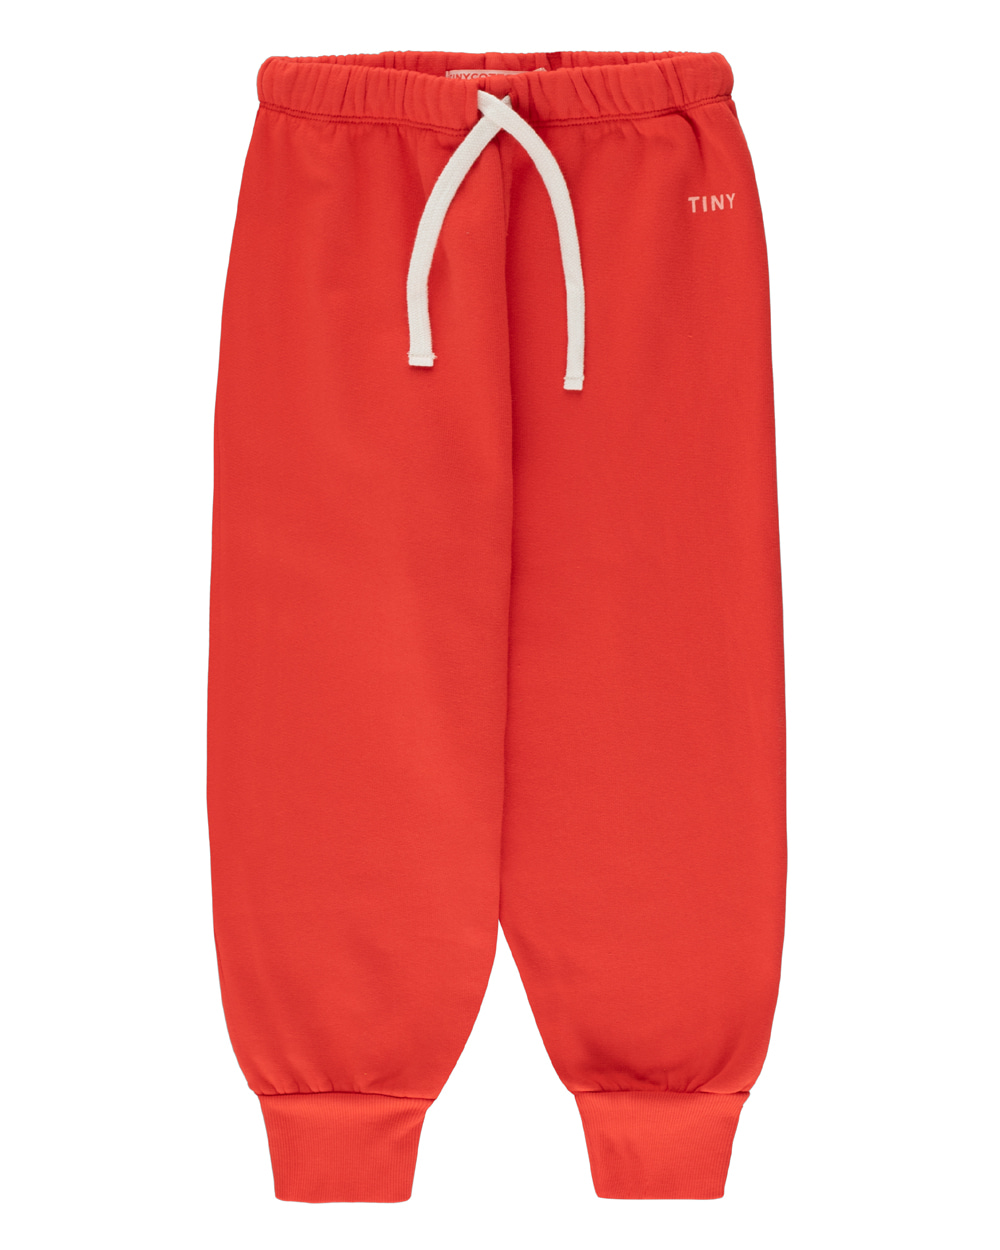 [TINY COTTONS]TINY SWEATPANT /deep red [6Y,12Y]